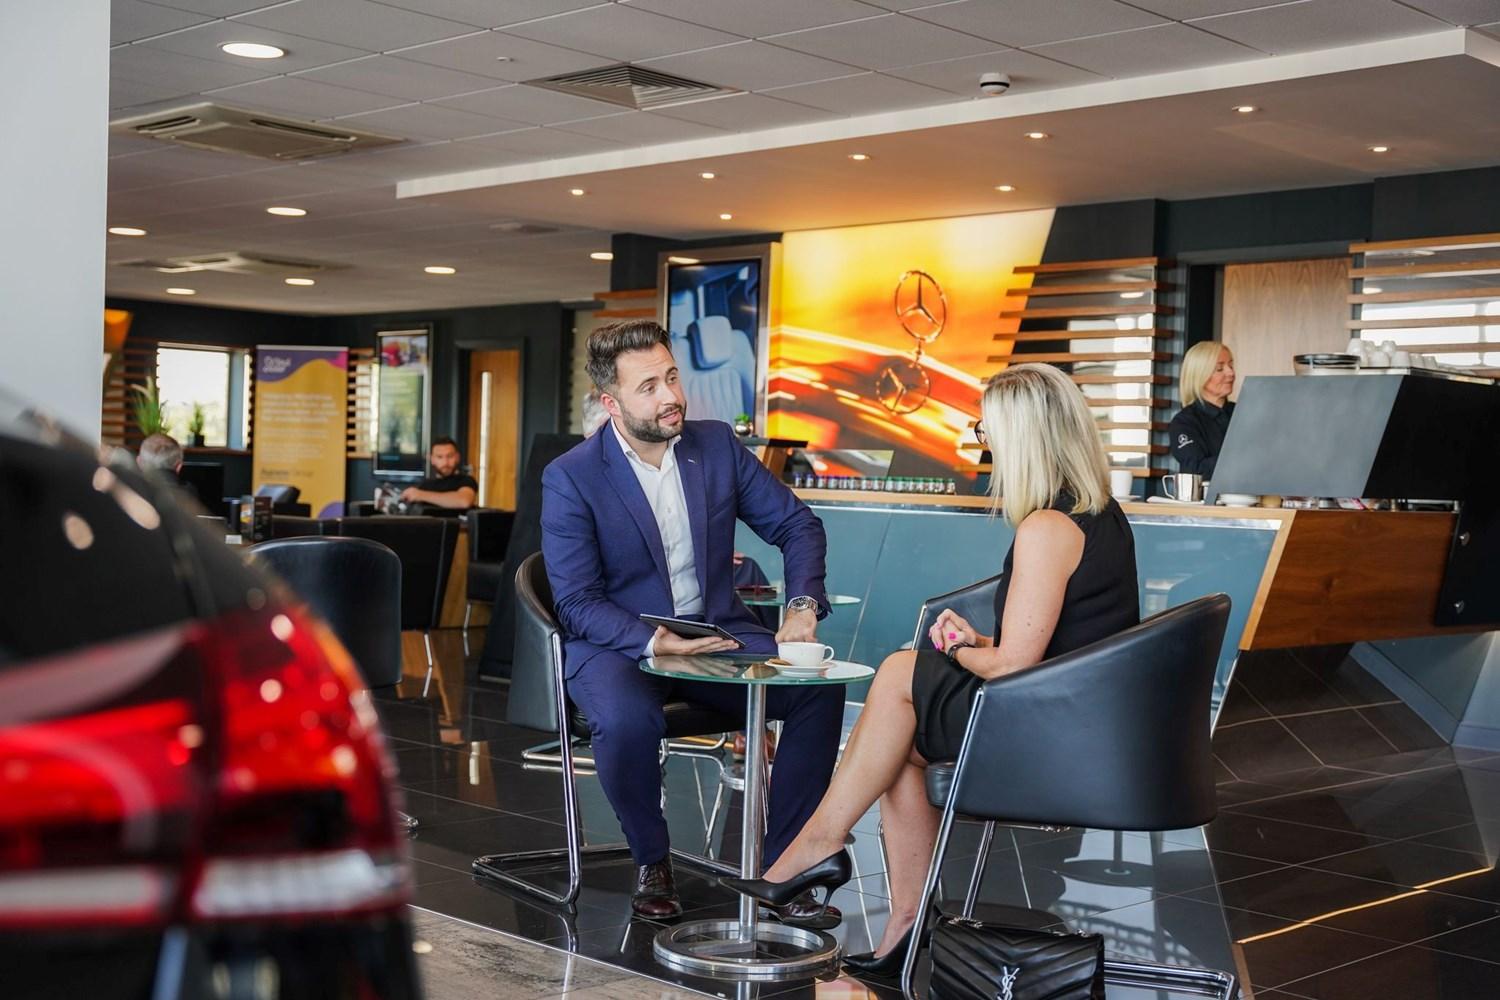 Mercedes-Benz Finance Specialist talks to customer in the Mercedes-Benz of Portadown showroom about Extended Warranty options available